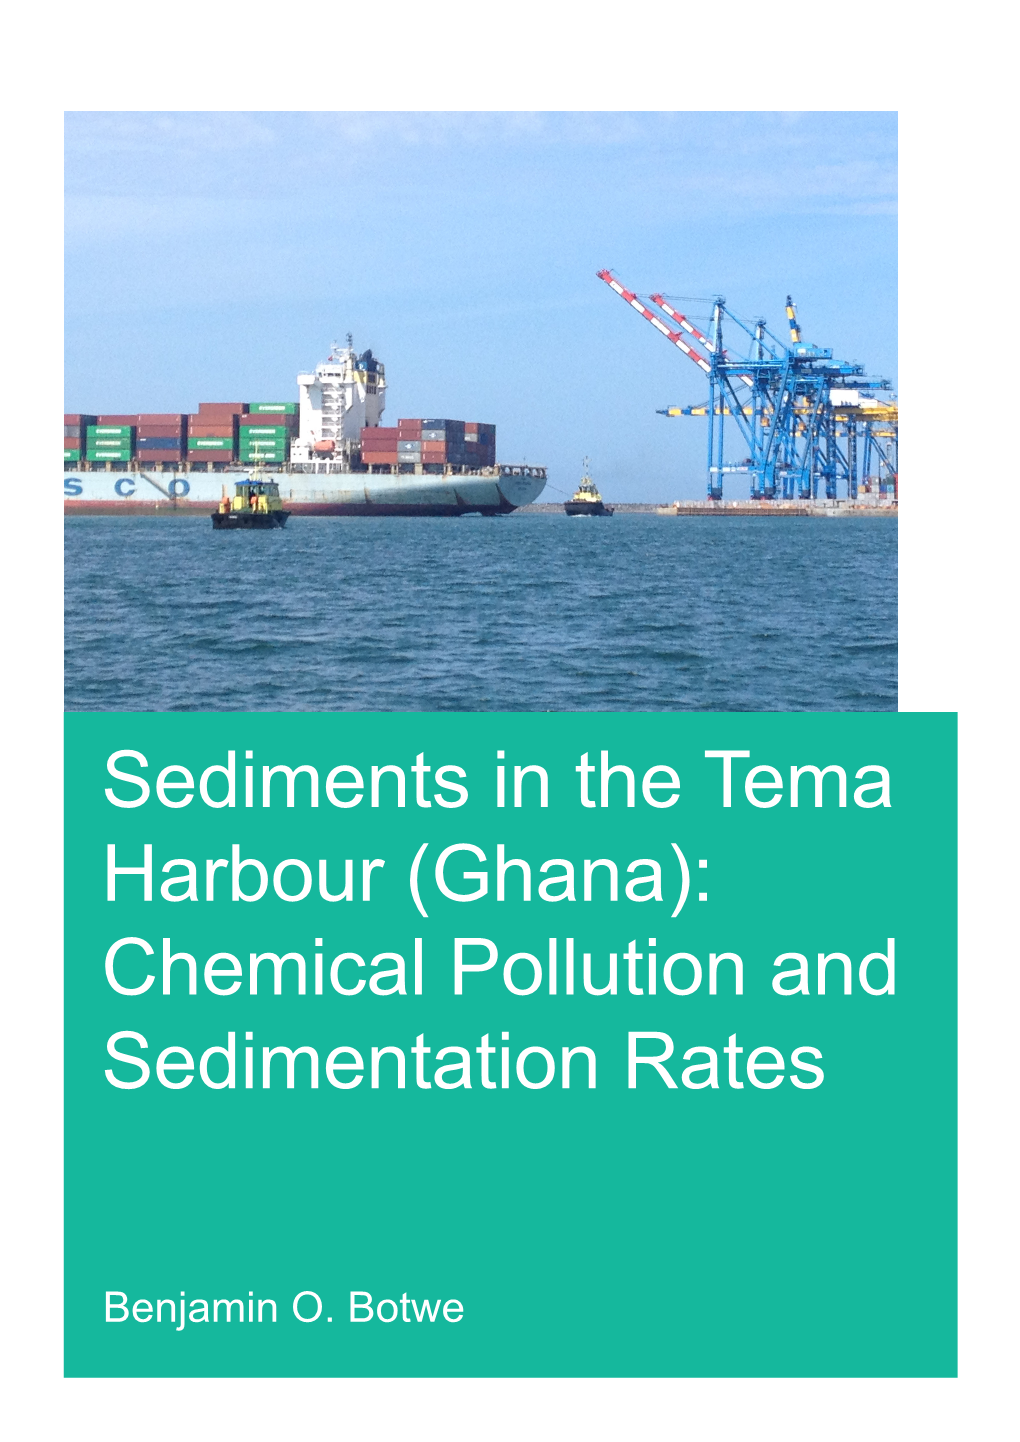 Sediments in the Tema Harbour (Ghana): Chemical Pollution and Sedimentation Rates